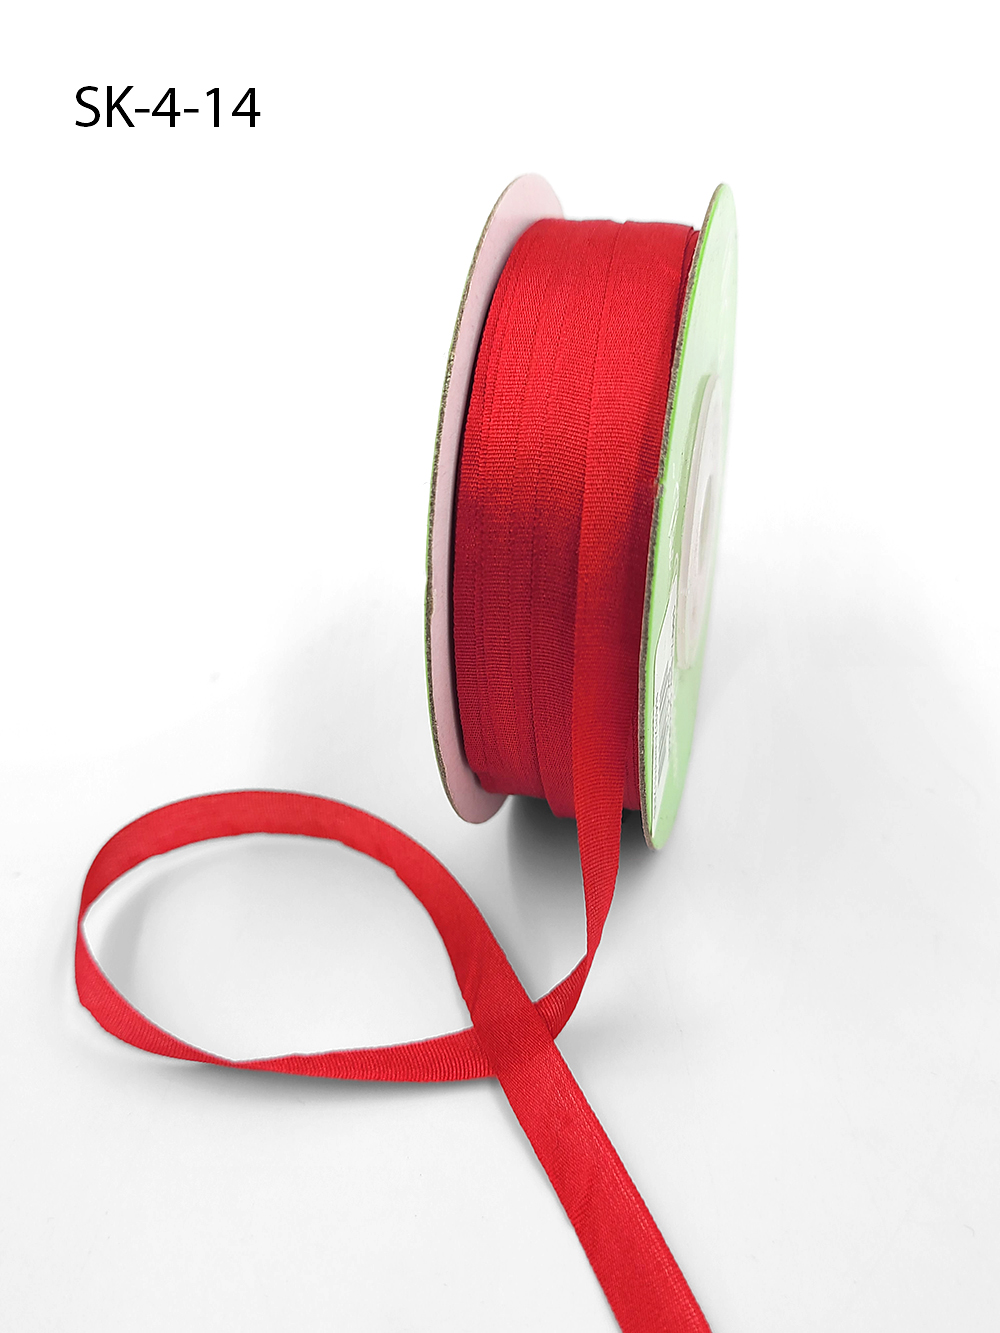 VATIN 1-1/2 Solid Red Grosgrain Ribbon Spool -50 Yards, Great for Sewing,  Gift Wrapping, Hair Bows, Flower Arranging, Home Decorating